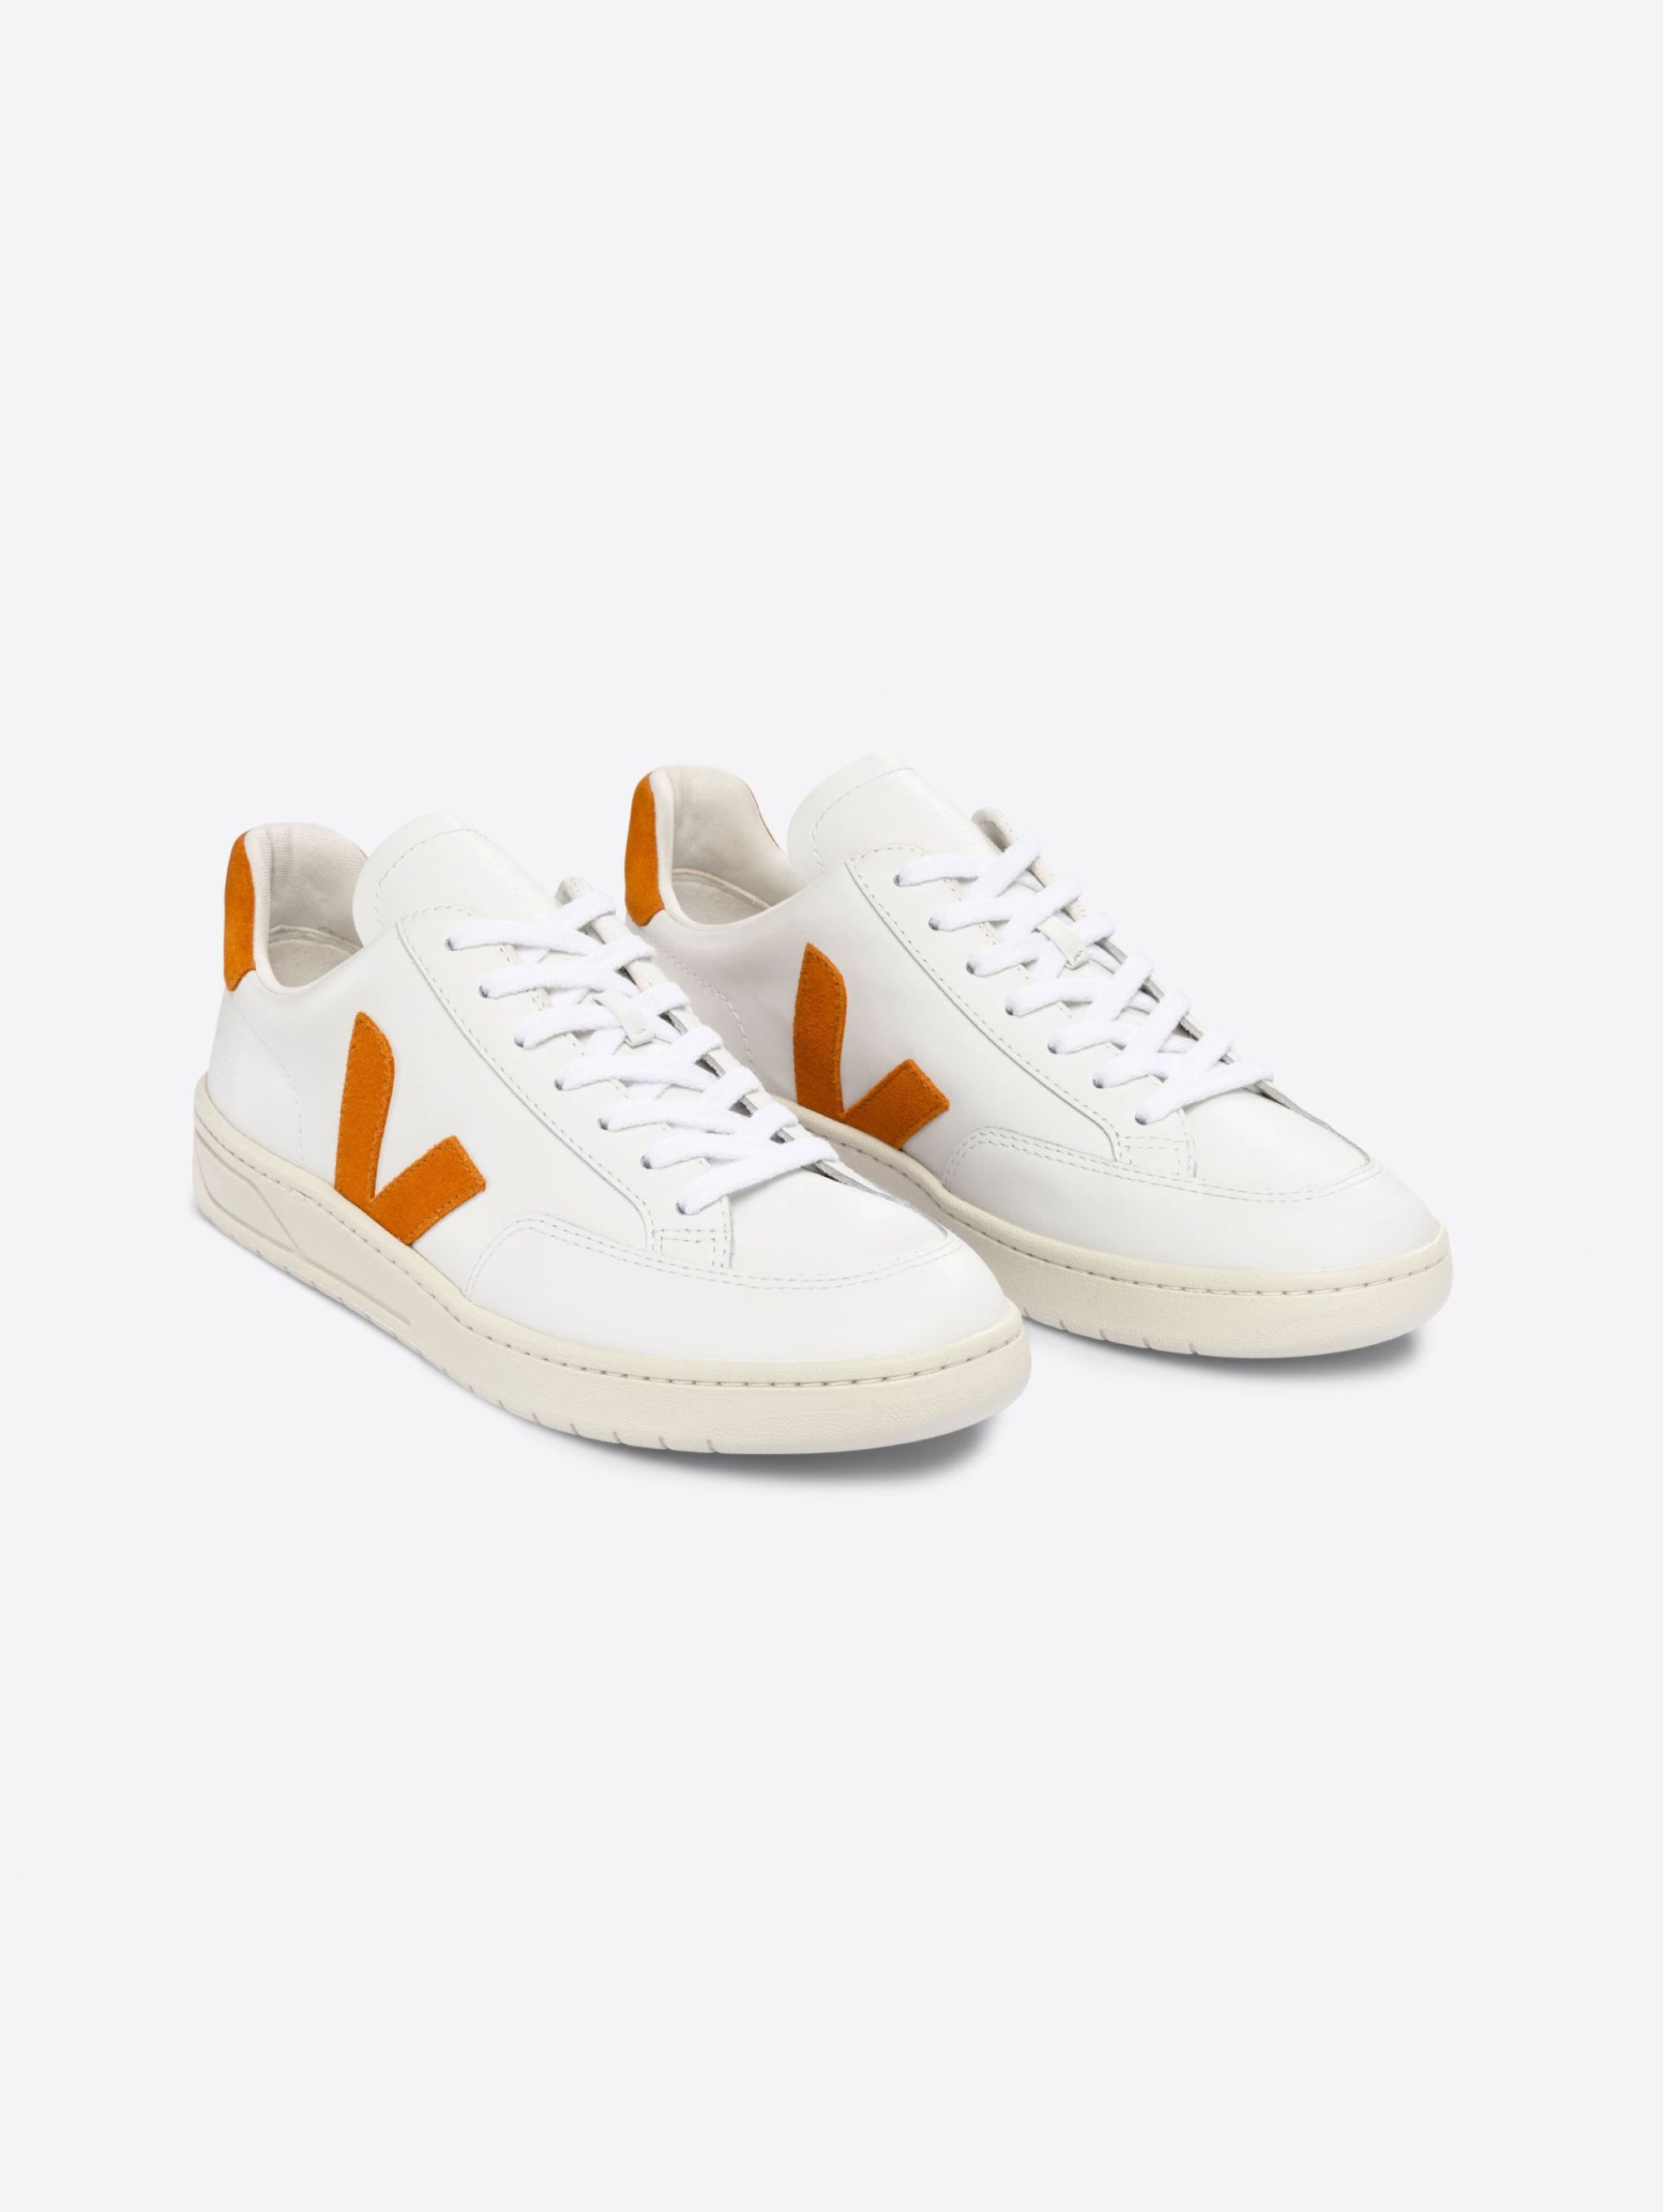 V-12 White/Orange Women's Sustainable Leather Sneakers